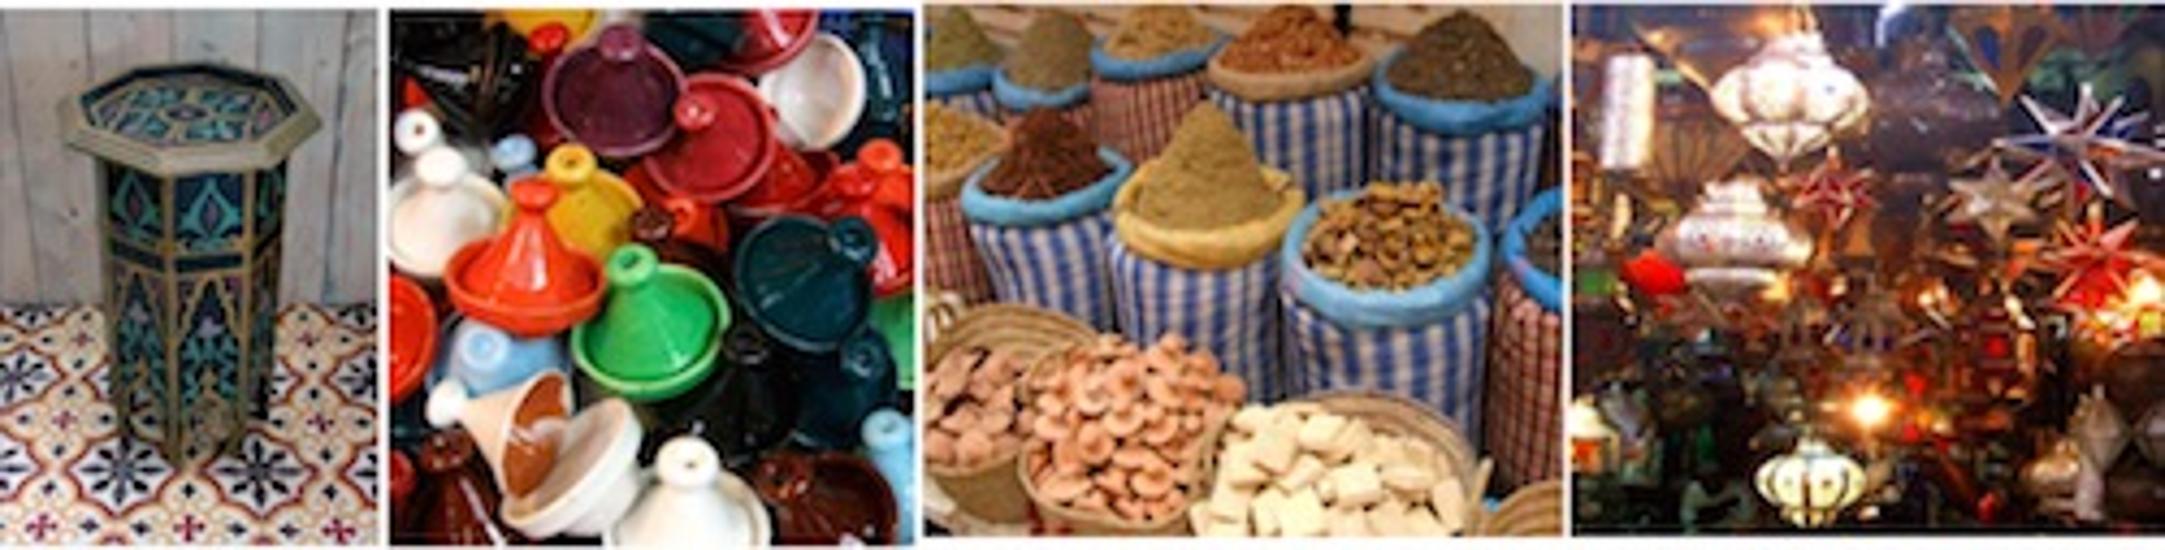 Moroccan Days, Central Market Hall, 12 - 14 April